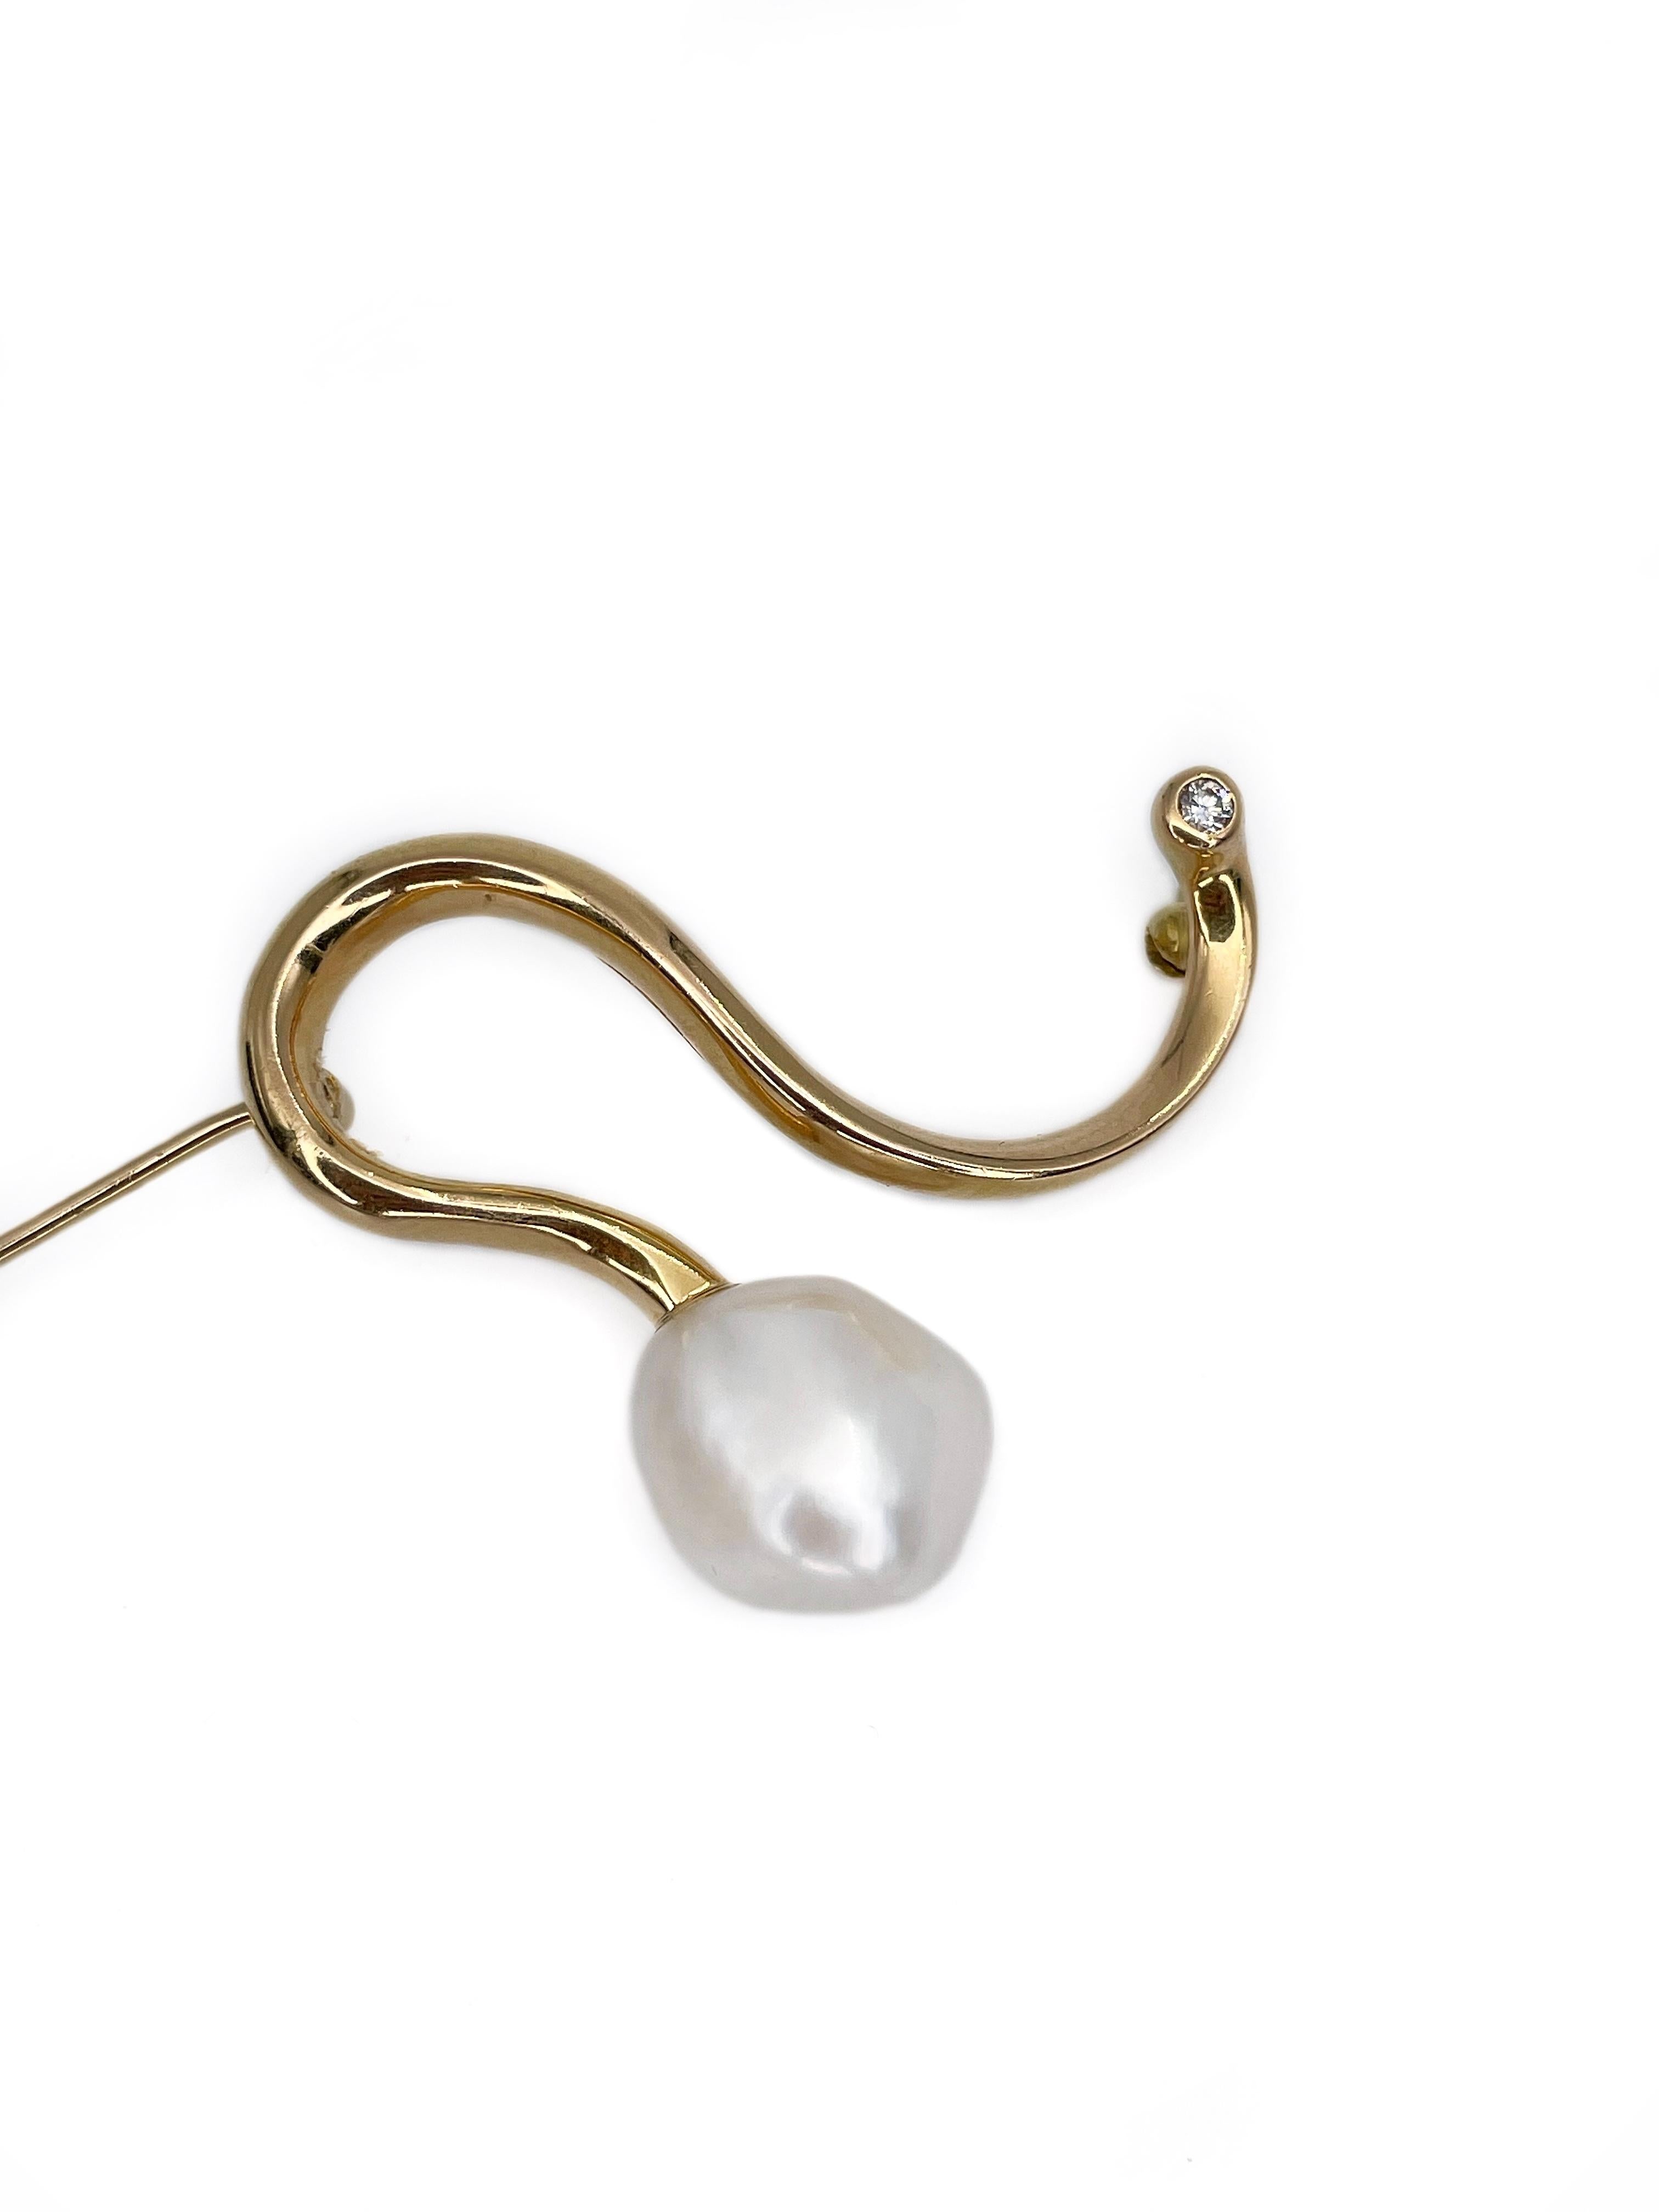 This is a vintage curved pin brooch crafted in 18K yellow gold. It features one cultured pearl and one brilliant cut diamond (0.04ct, RW-W, VS). 

It is an exceptional and elegant brooch.

Hallmarks: “VH 750”

Weight: 10.12g
Size: 4x3cm

———

If you